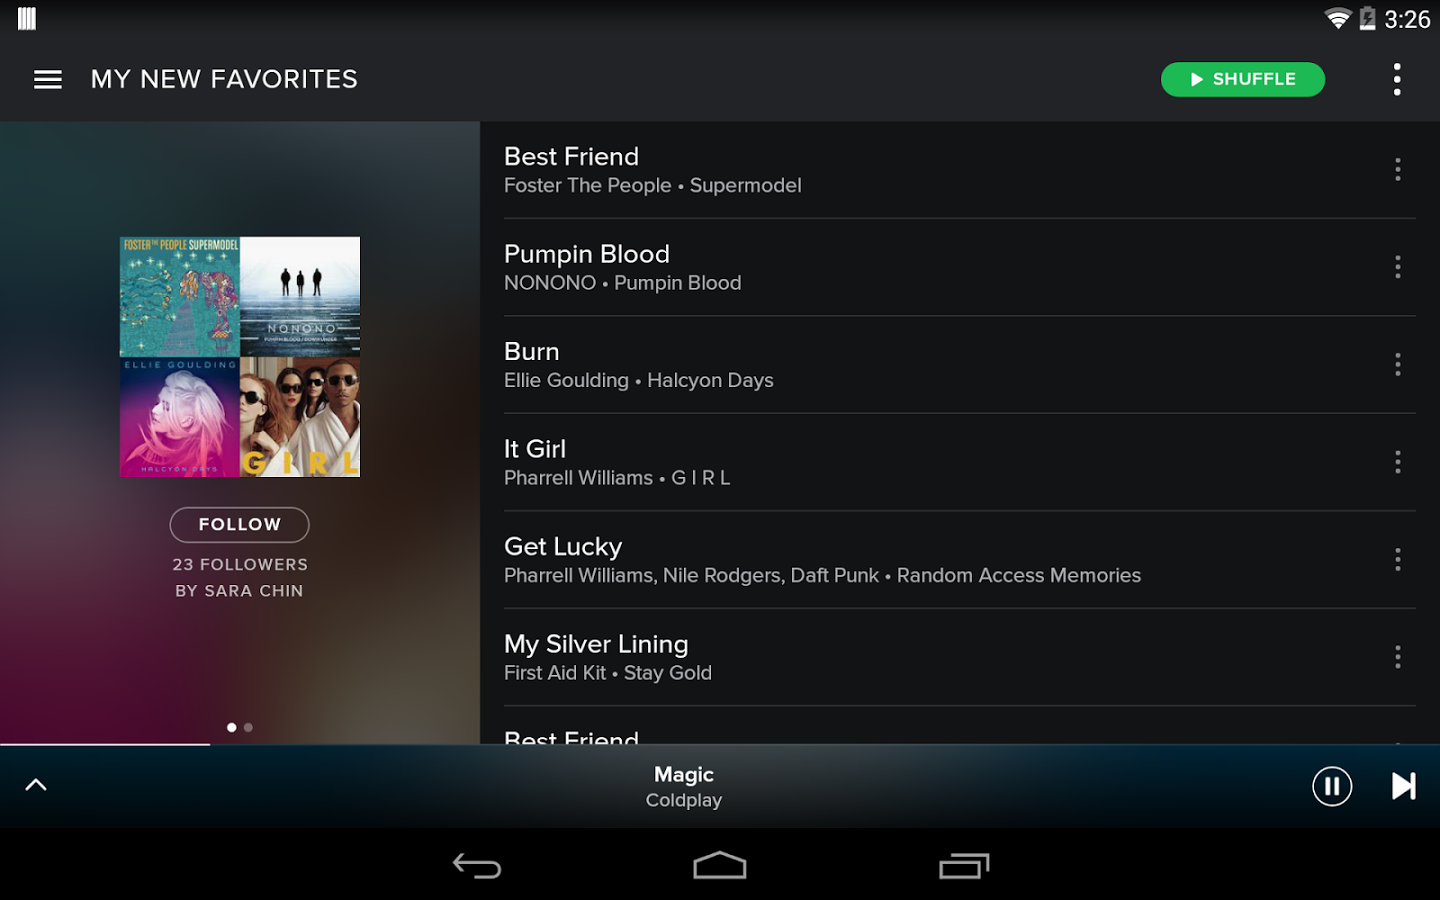 Download Music From Spotify To Android Phone